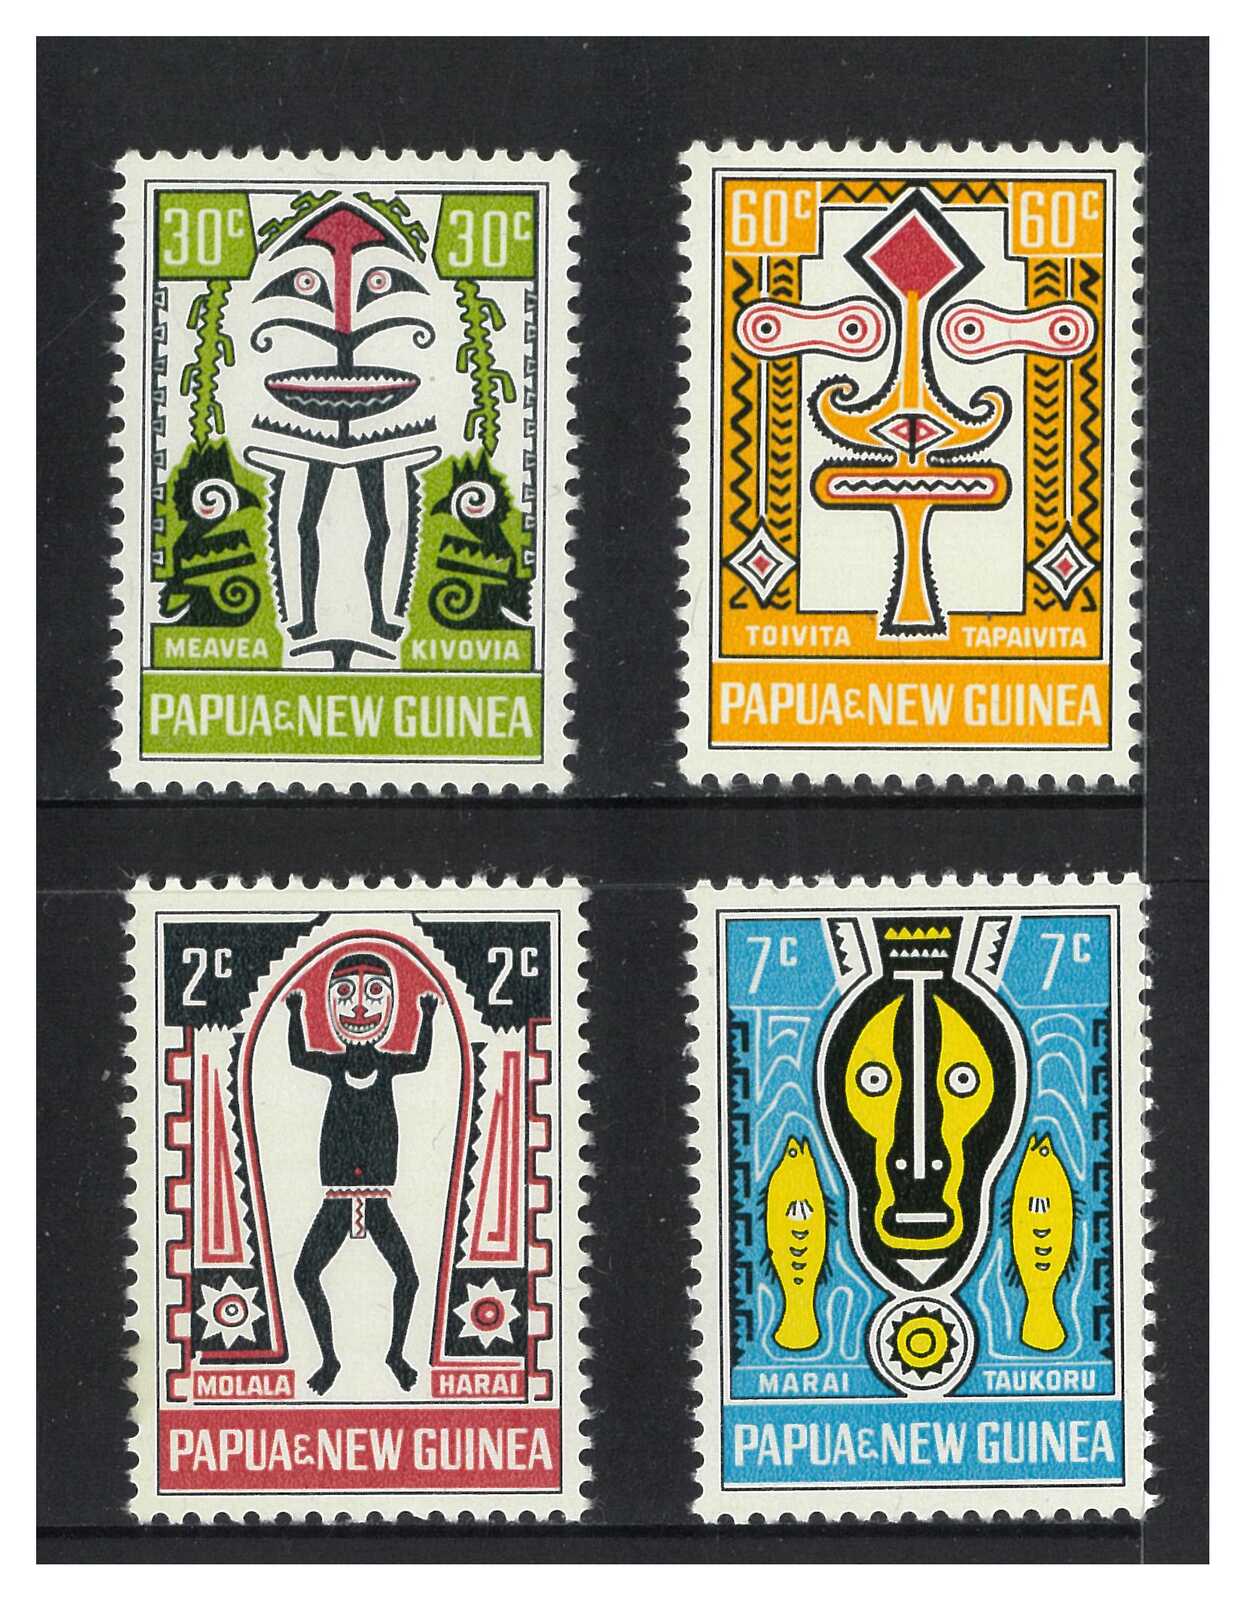 Papua New Guinea 1966 Folklore/Elema Art 1st Series Set of 4 Stamps MUH ...